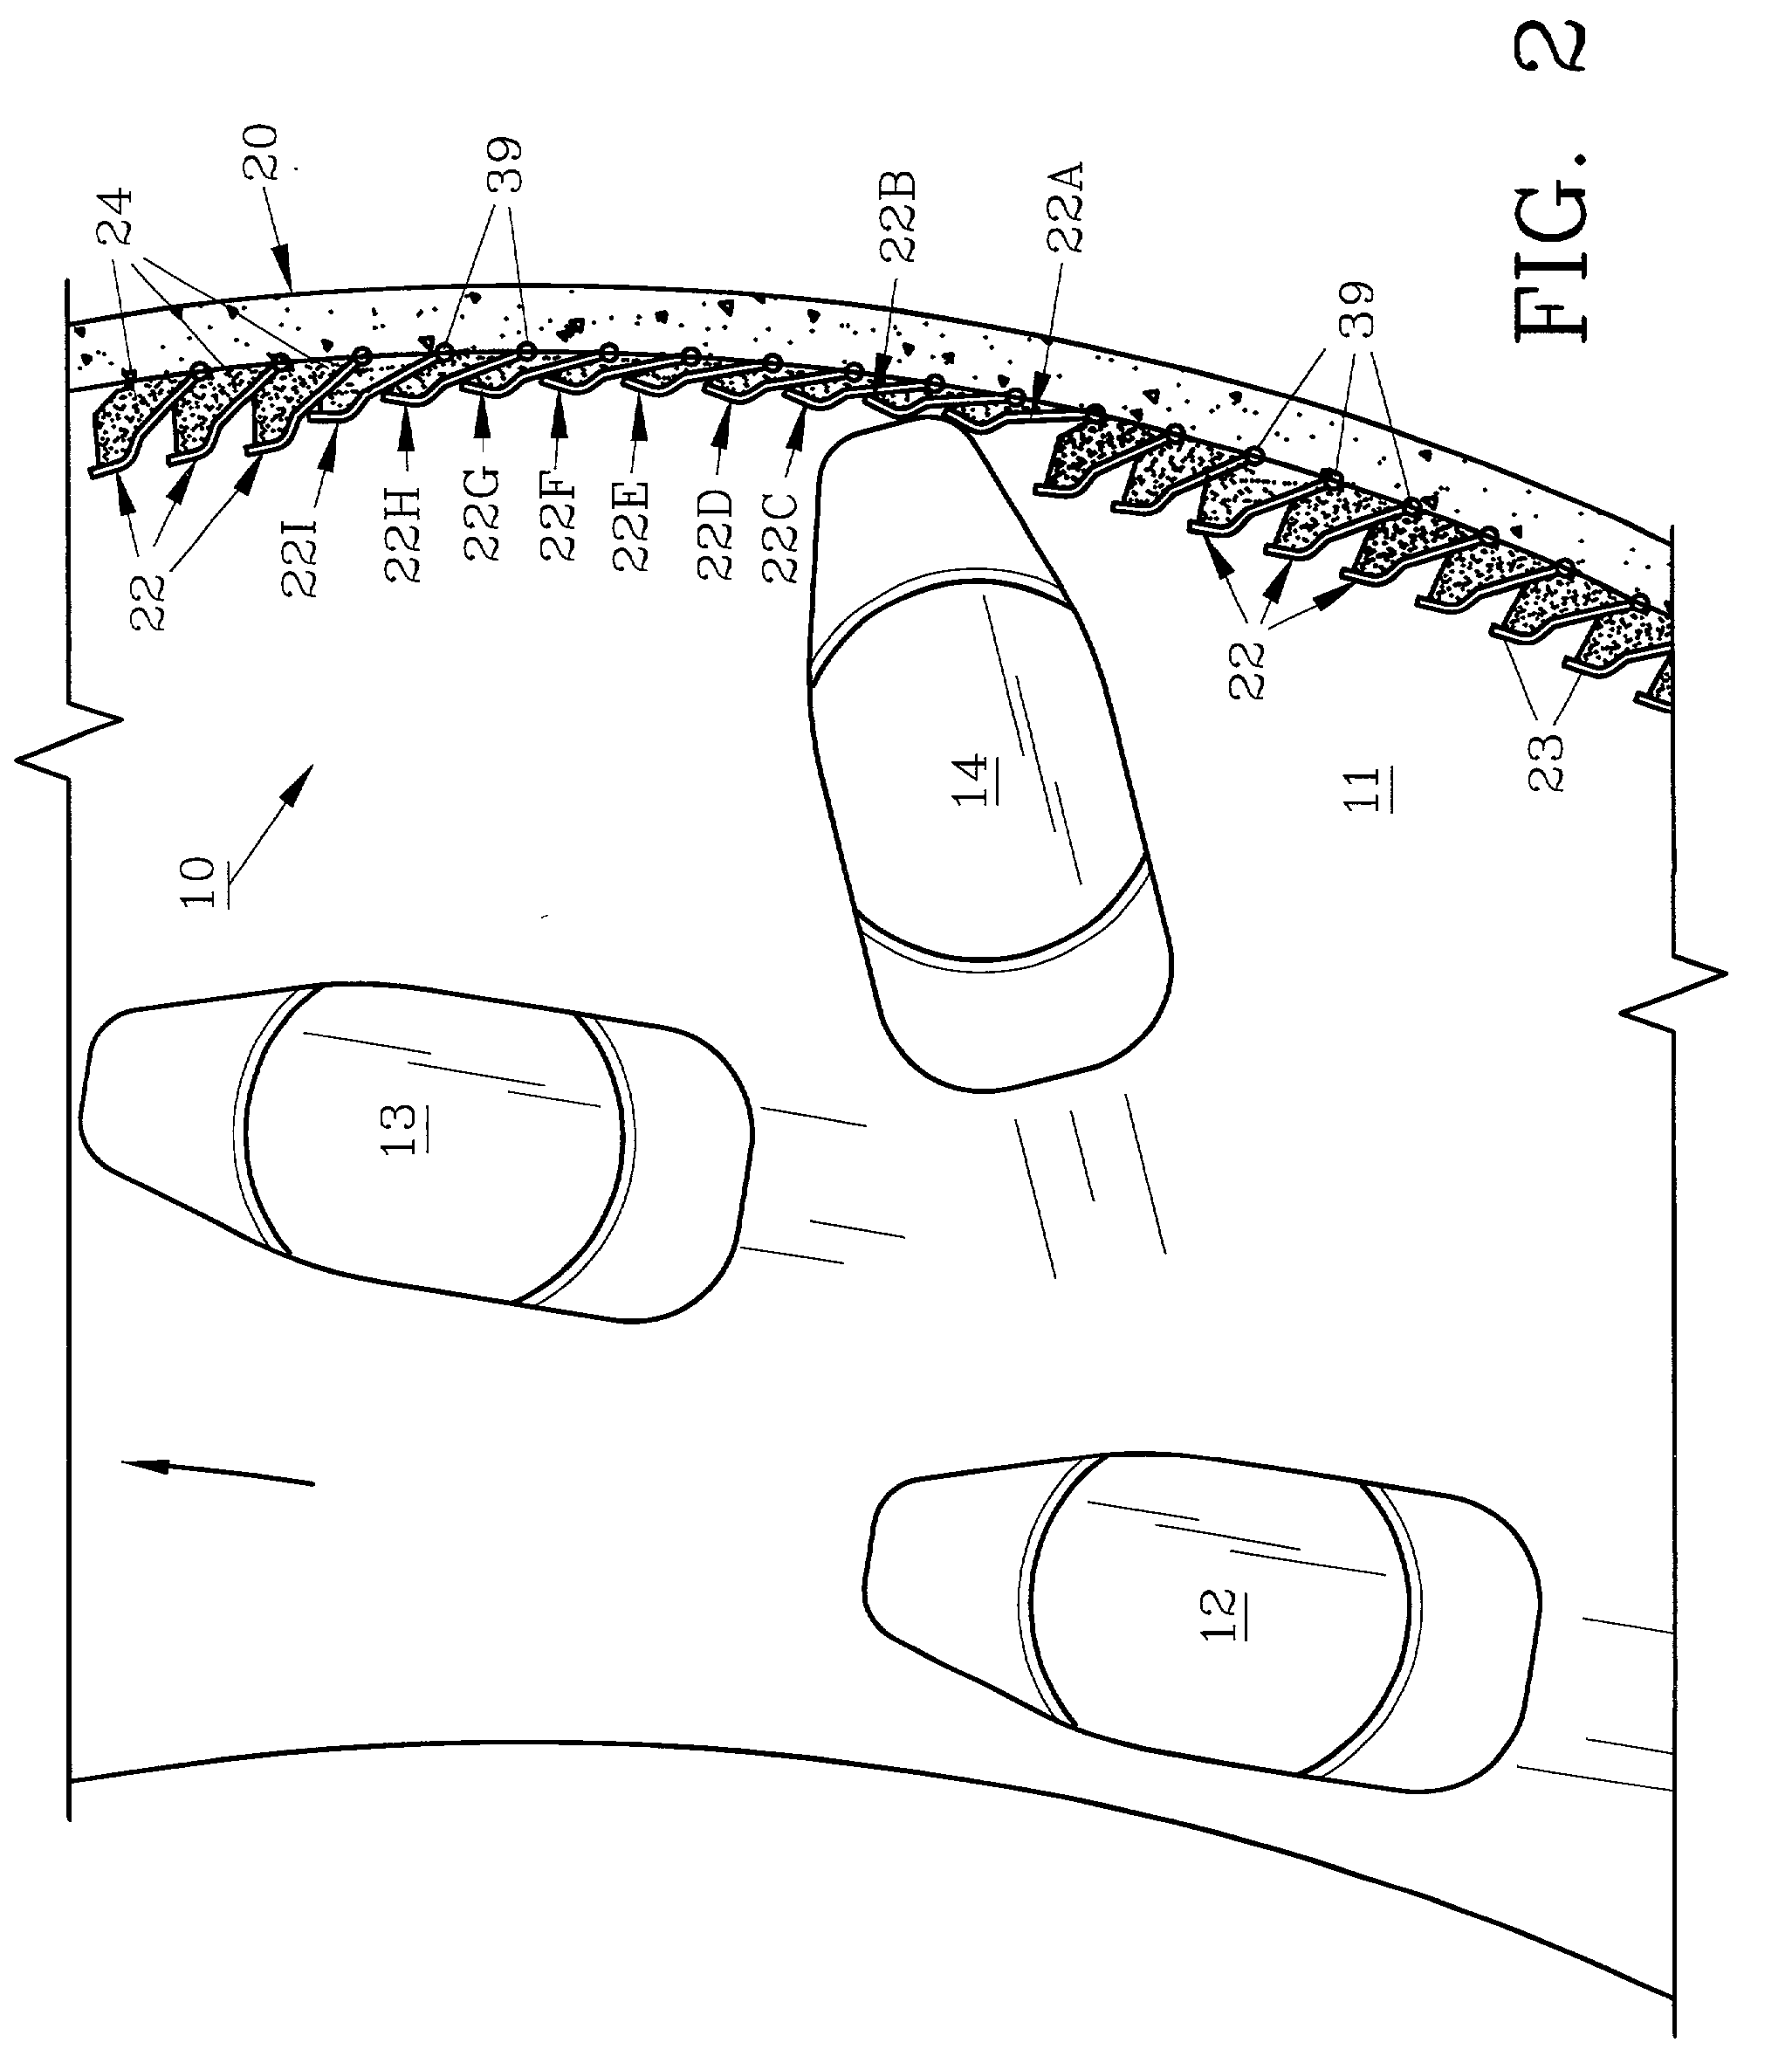 Energy absorbing system and method